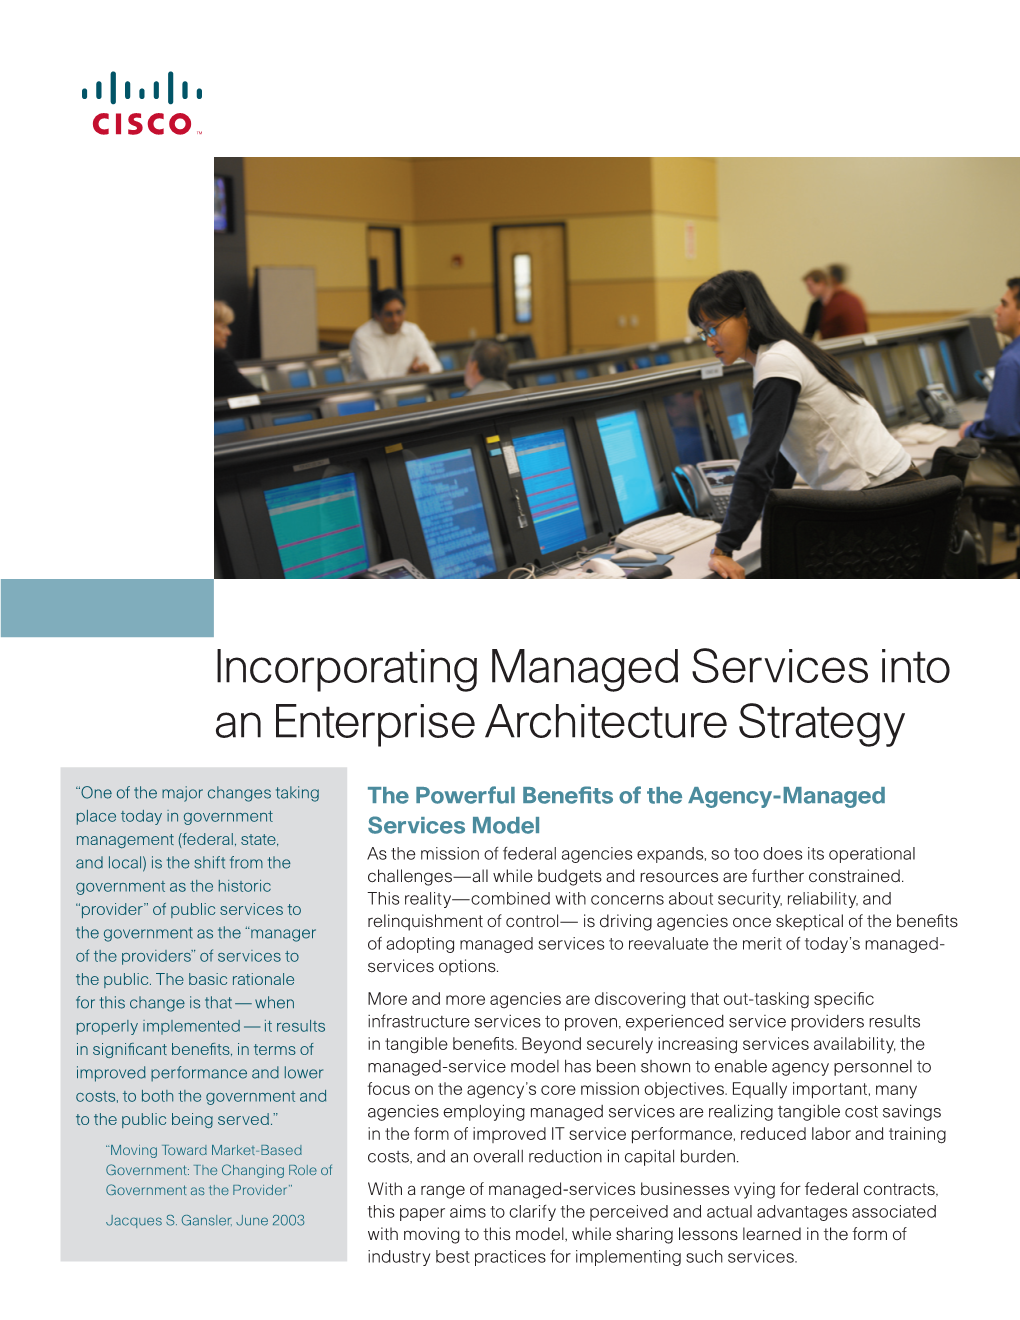 Incorporating Managed Services Into an Enterprise Architecture Strategy